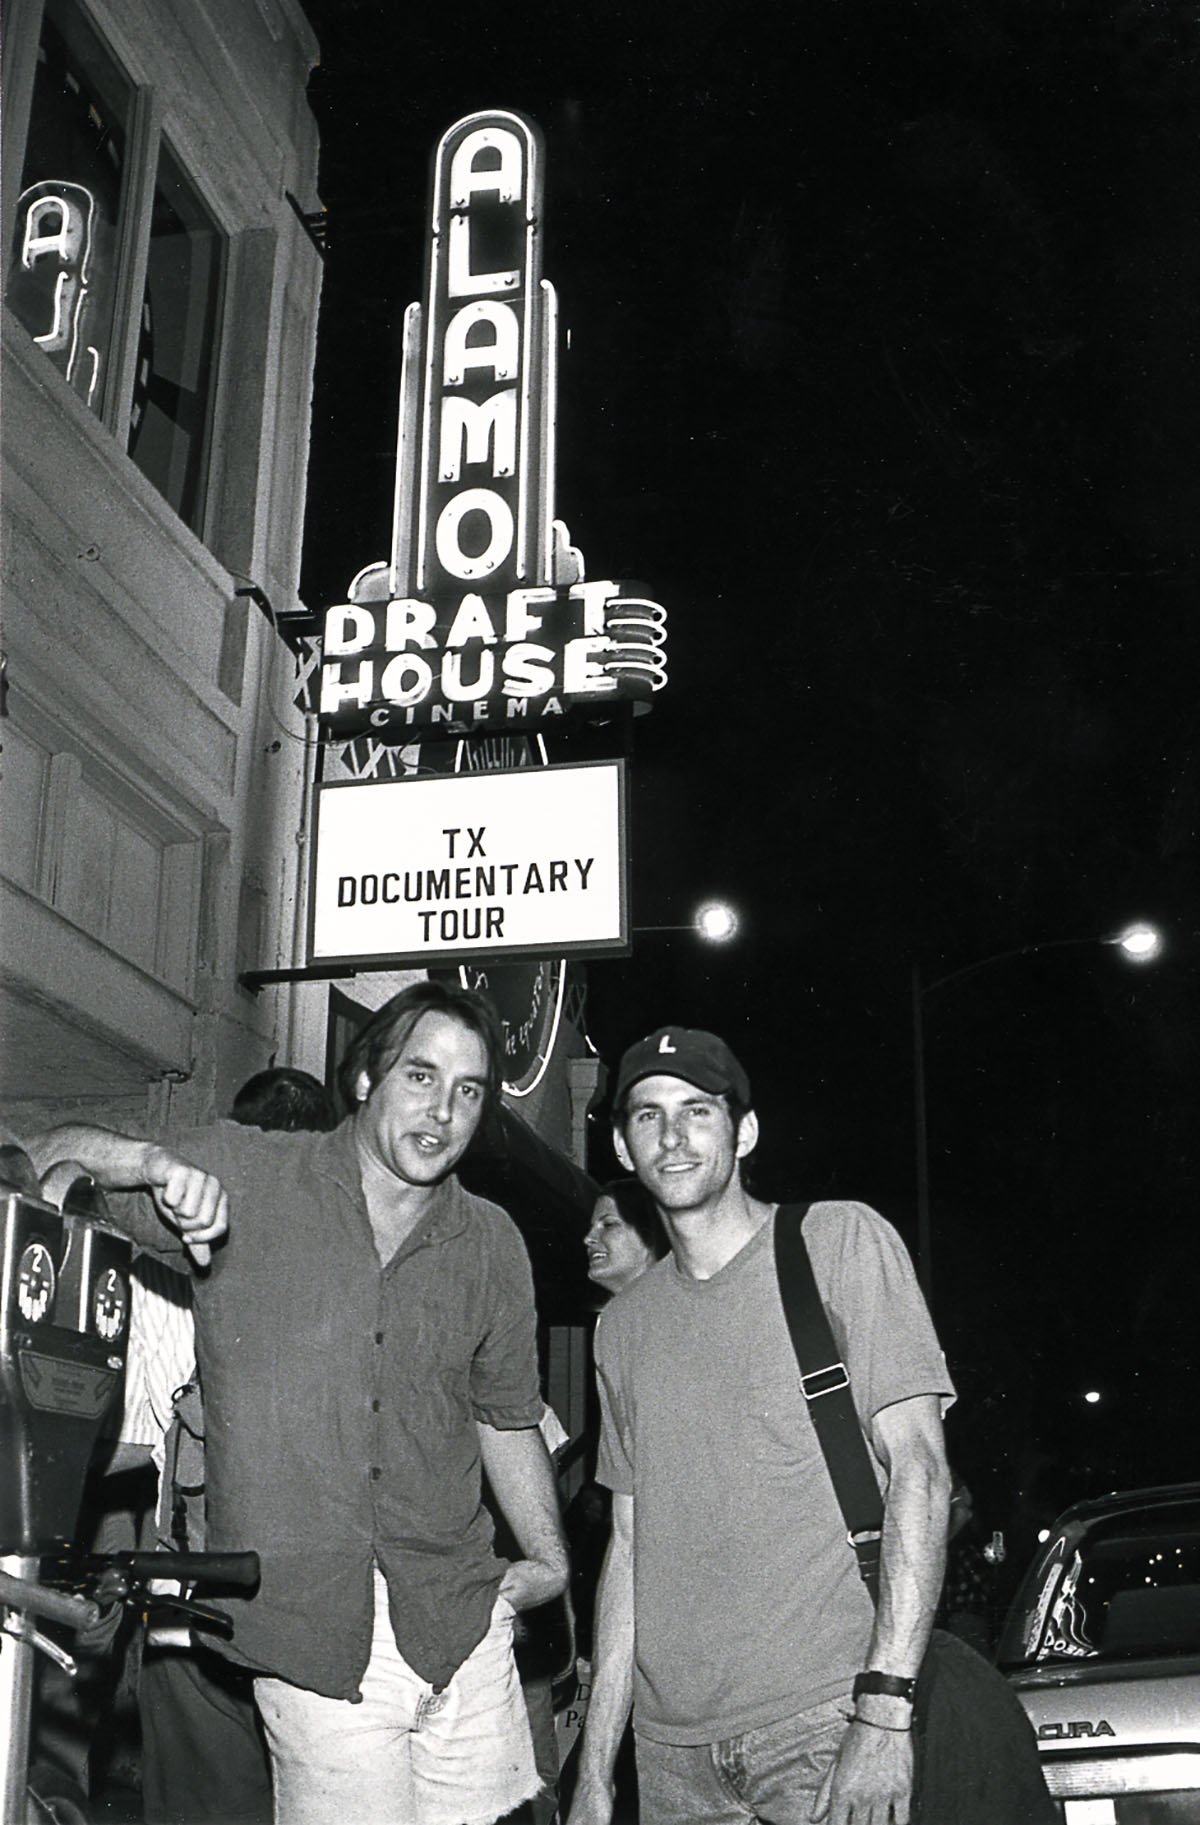 Richard Linklater poses outside the Alamo Drafthouse Cinema in Austin beneath a sign reading "TX Documentary Tour"